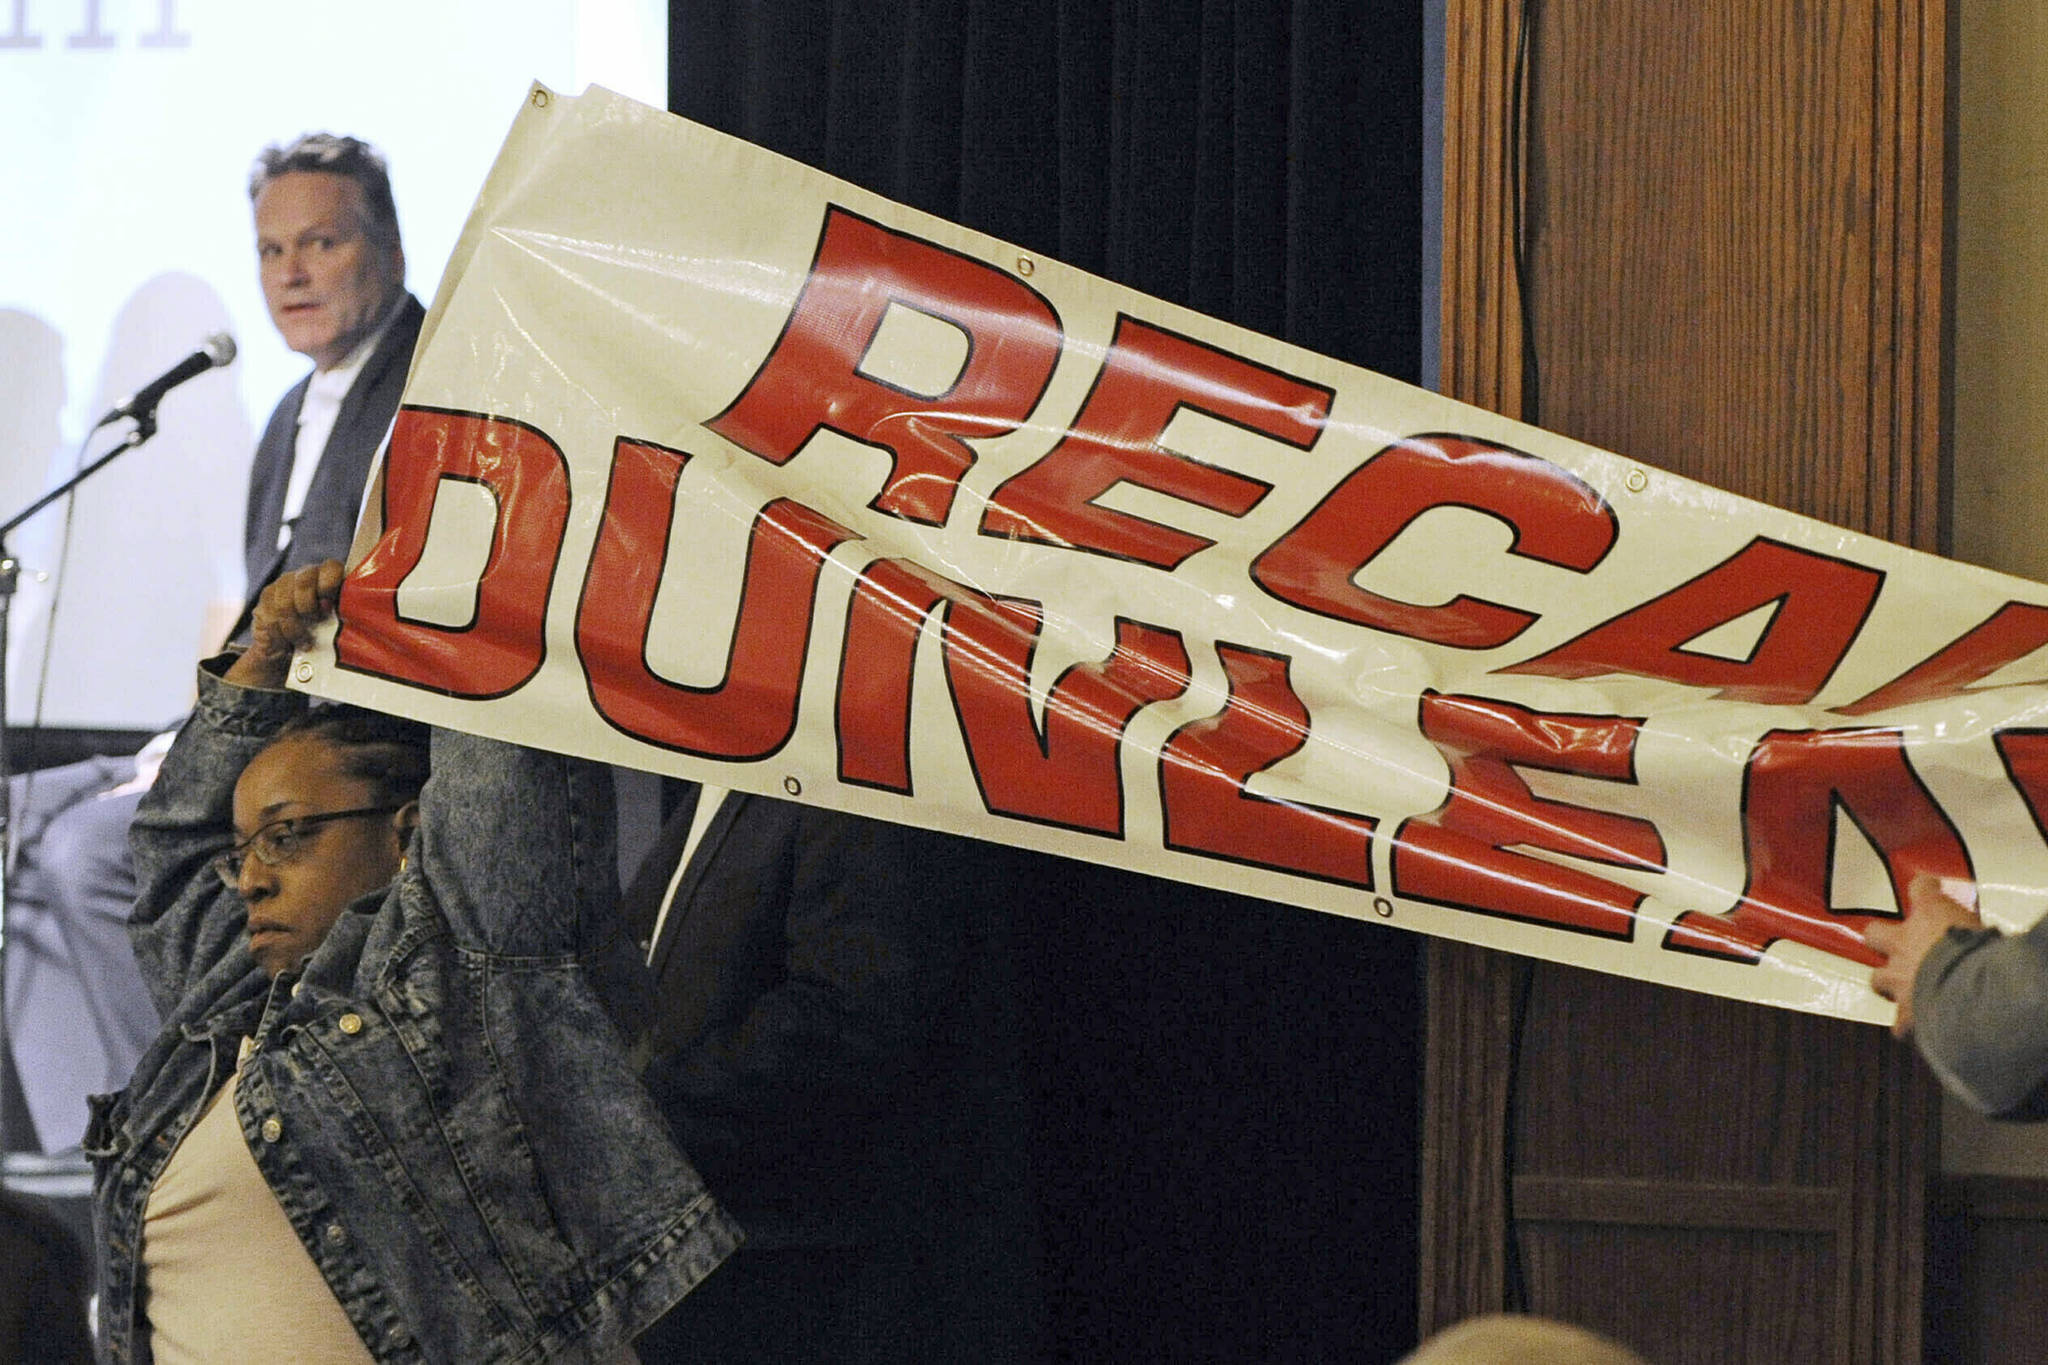 In this March 26, 2019, file photo, protestors unfurl a “Recall Dunleavy” banner as Gov. Mike Dunleavy, upper left, speaks during a roadshow with Americans for Prosperity in 49th State Brewing Company in Anchorage, Alaska. Dunleavy said he hopes to move past the rancor of his first year in office, amid an unsettled dispute with lawmakers over state spending and threat of a recall effort looming large. The Republican will mark a full year in office Tuesday, Dec. 3. (Bill Roth/Anchorage Daily News via AP, File)